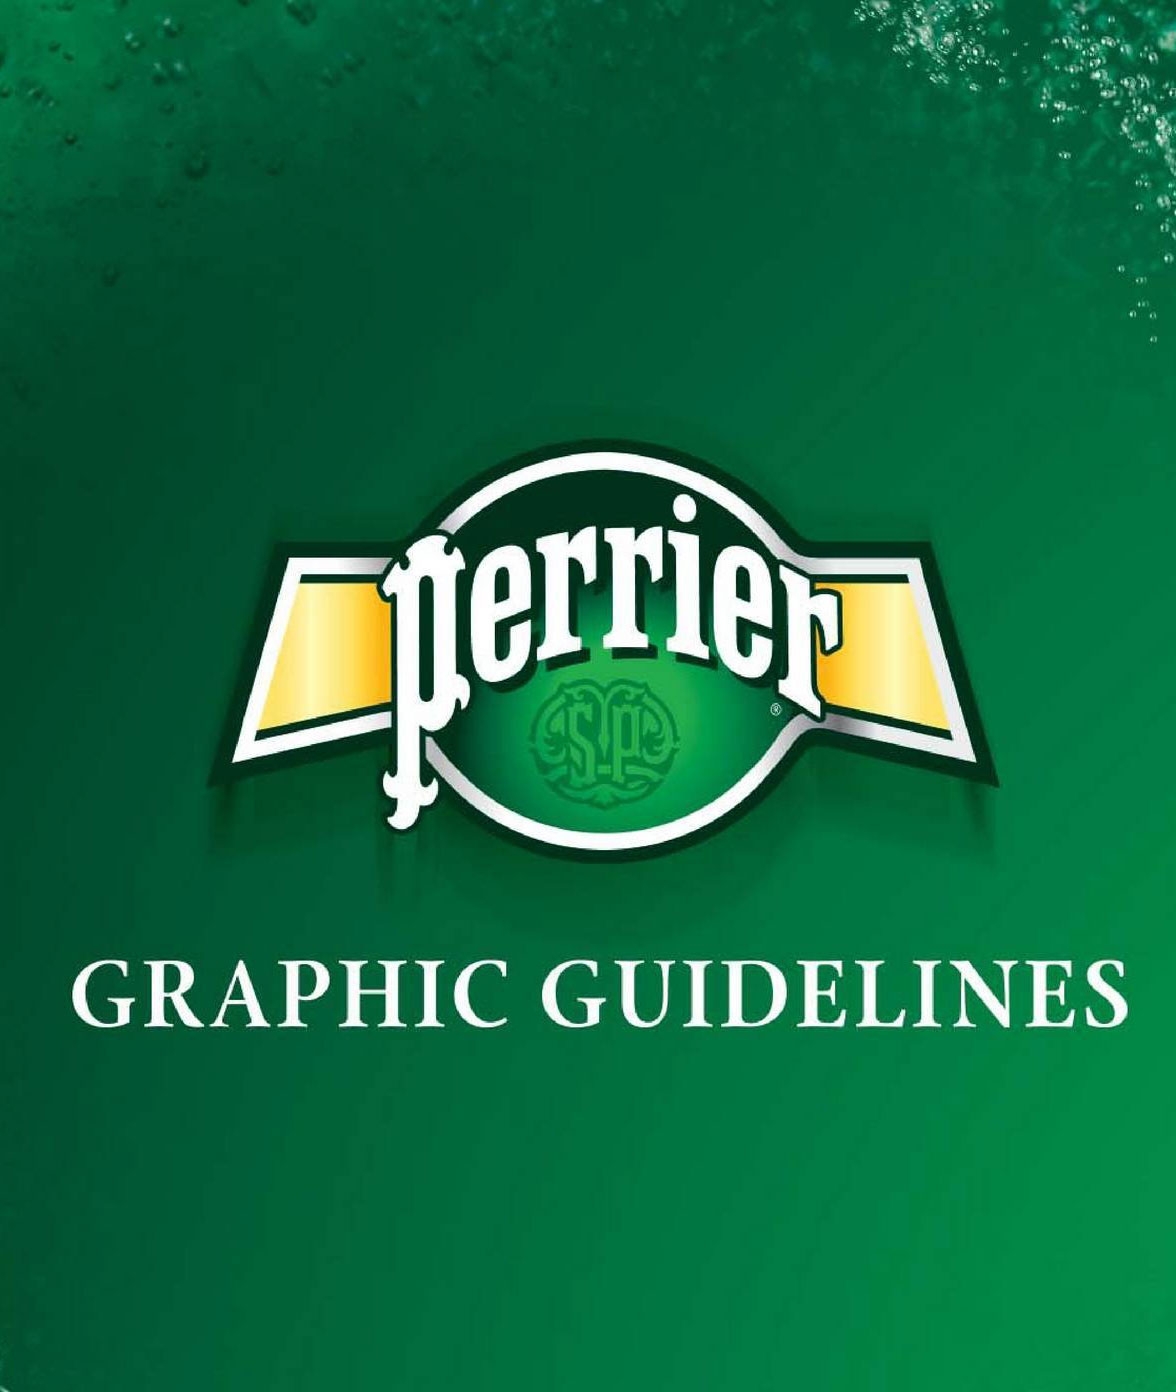 Perrier Graphic Guidelines